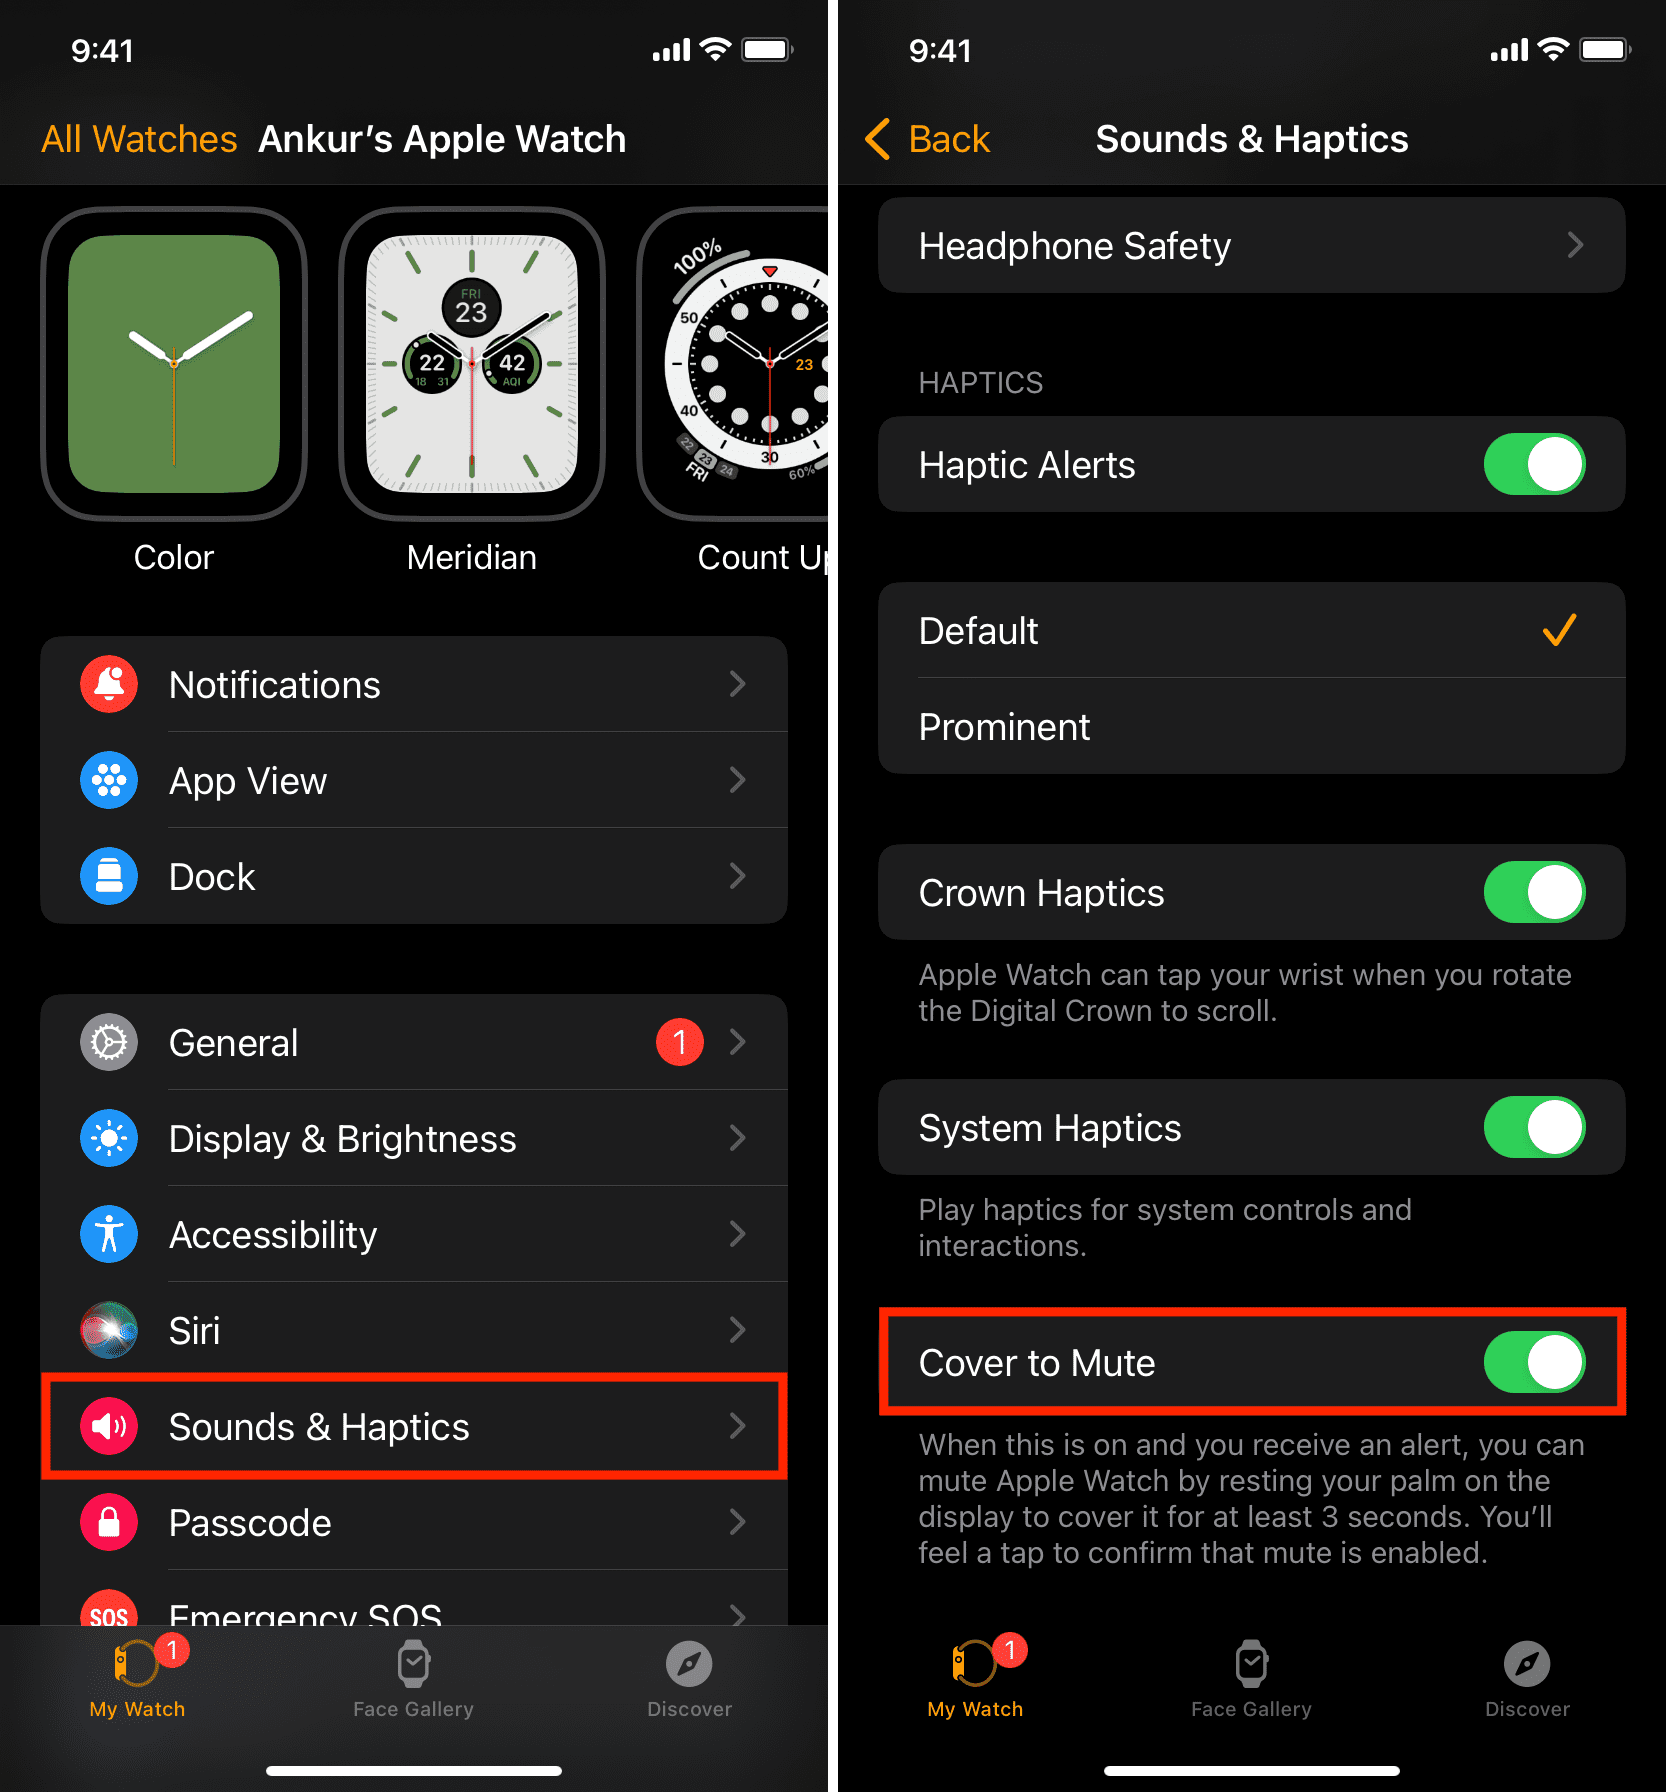 Cover to Mute in the Watch app